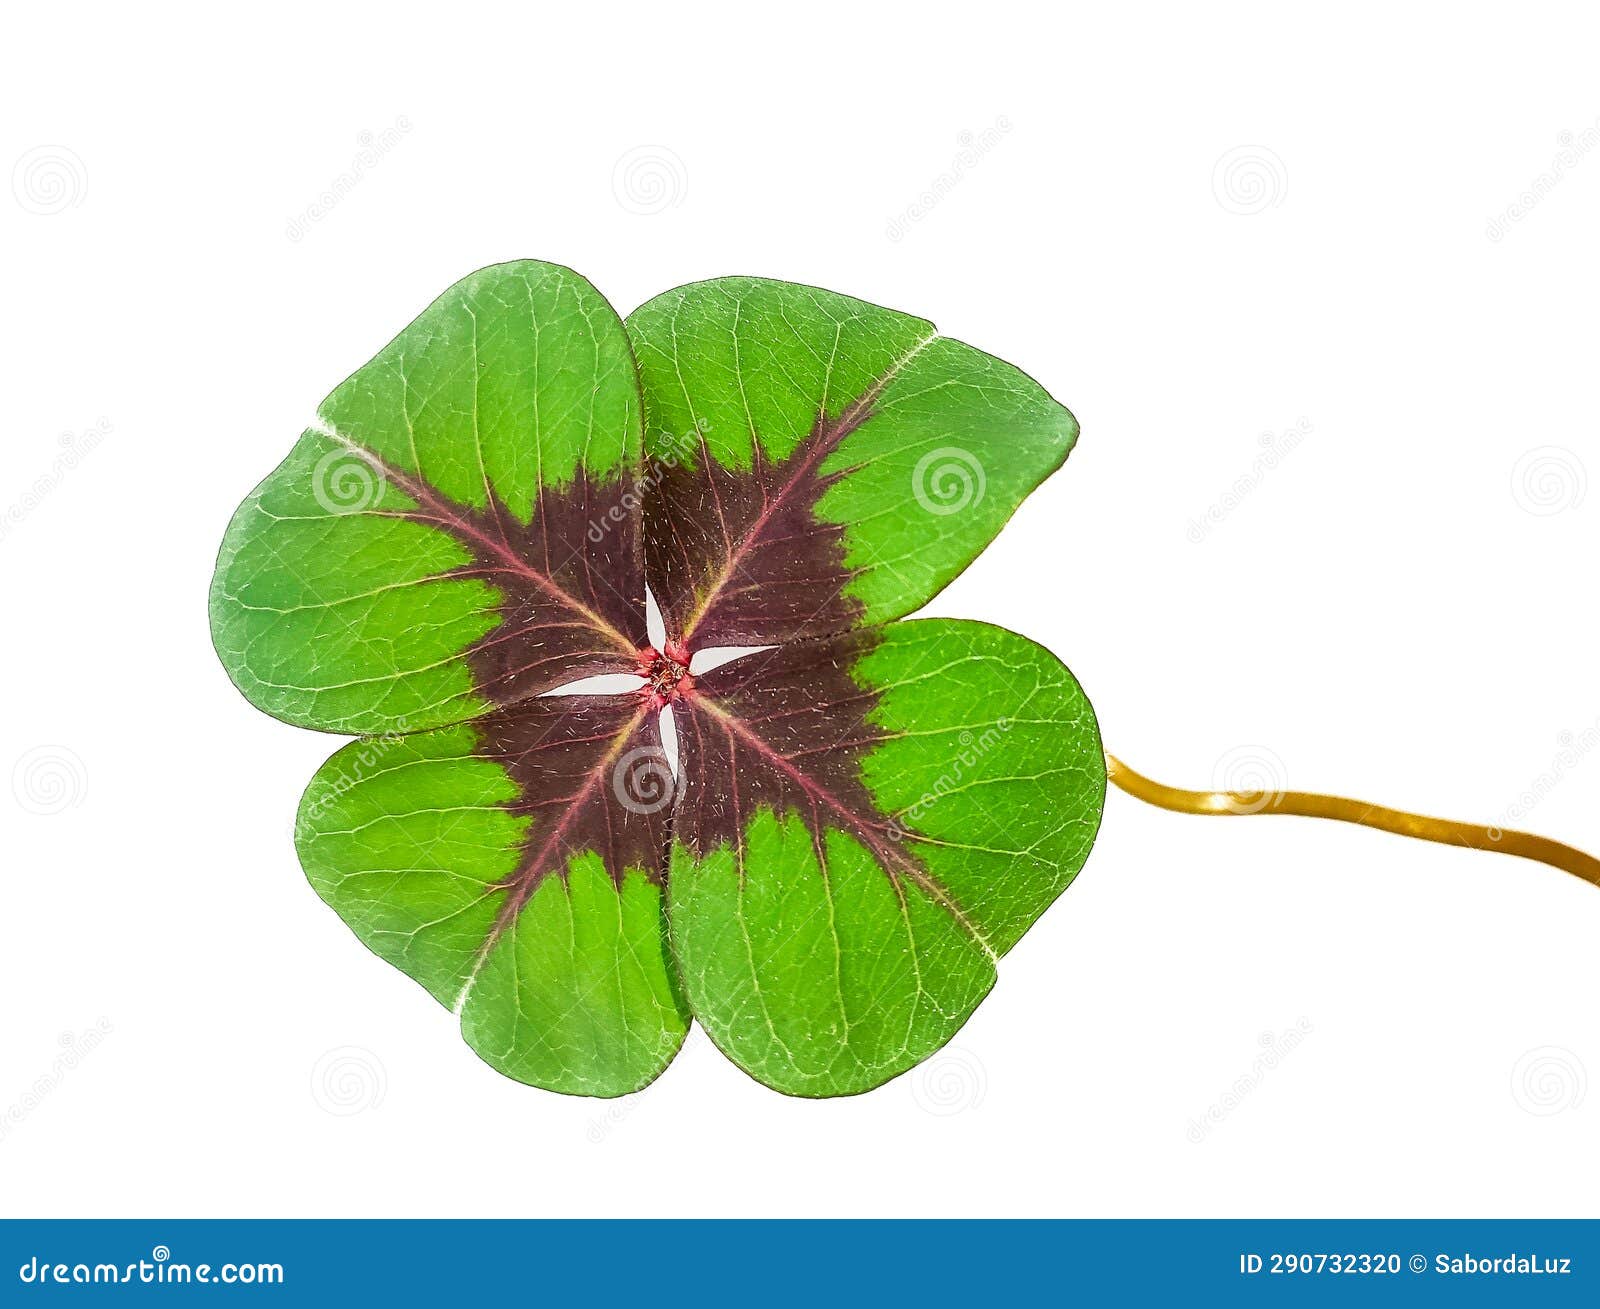 four-leaf clover  in a white background